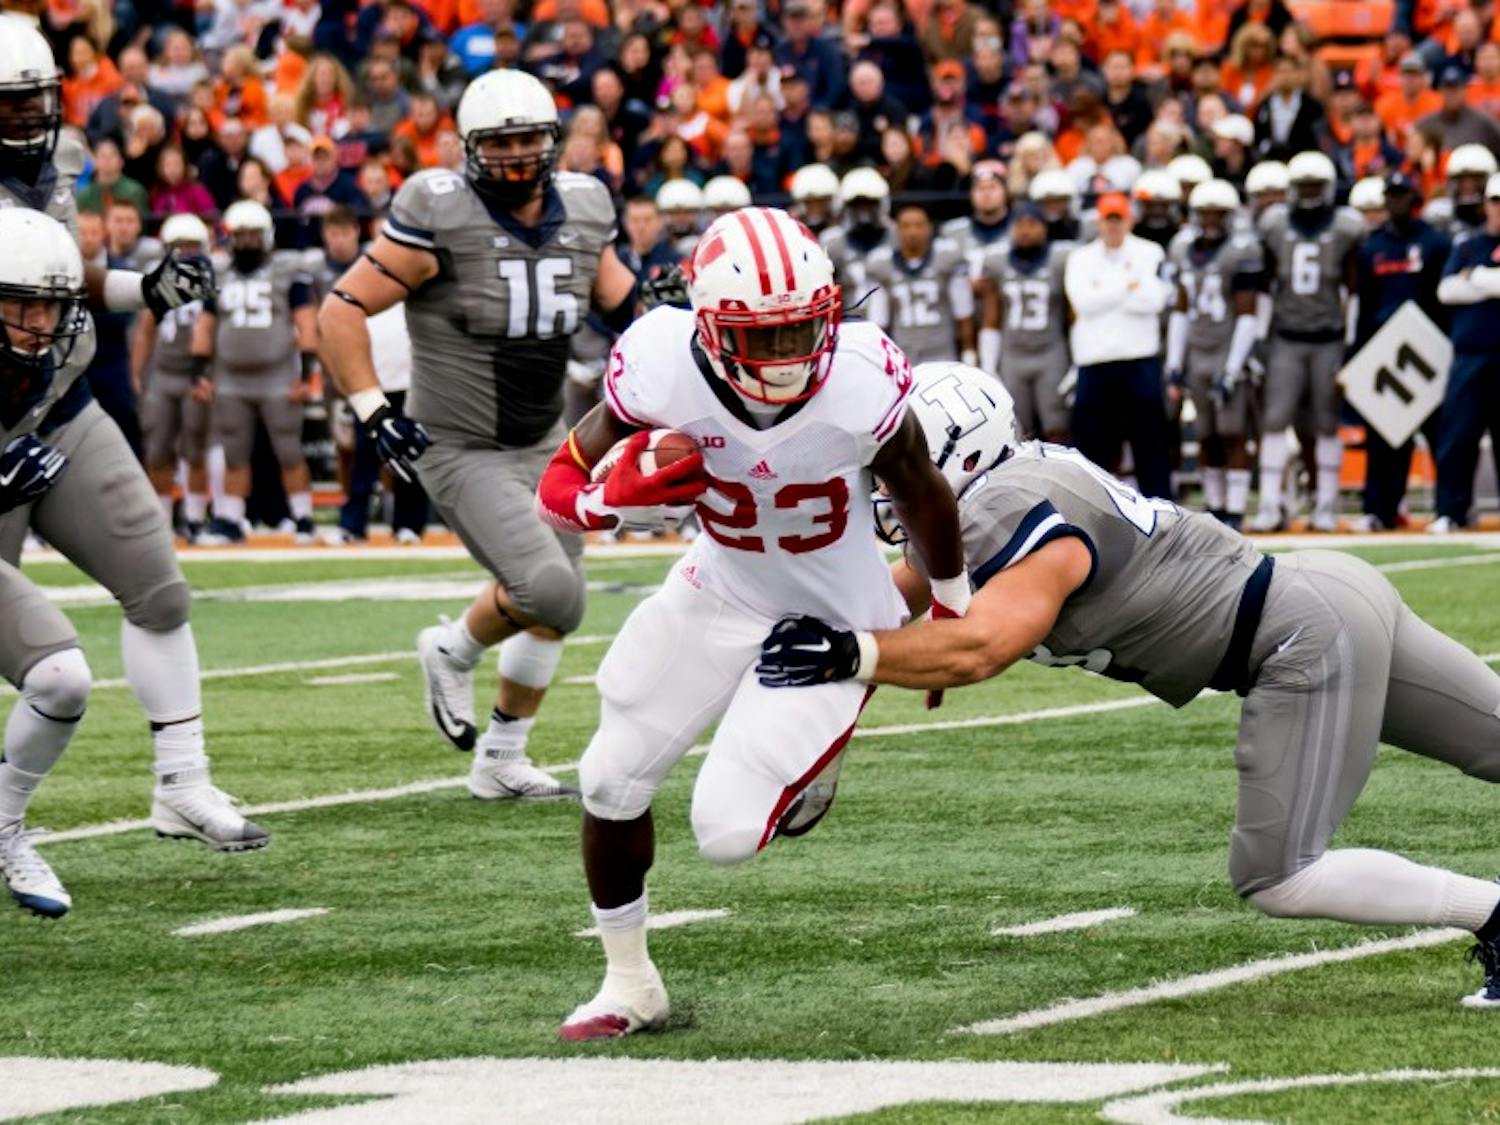 The Badgers, led by their trio of running backs, look to continue their winning ways against Illinois on Homecoming weekend.&nbsp;